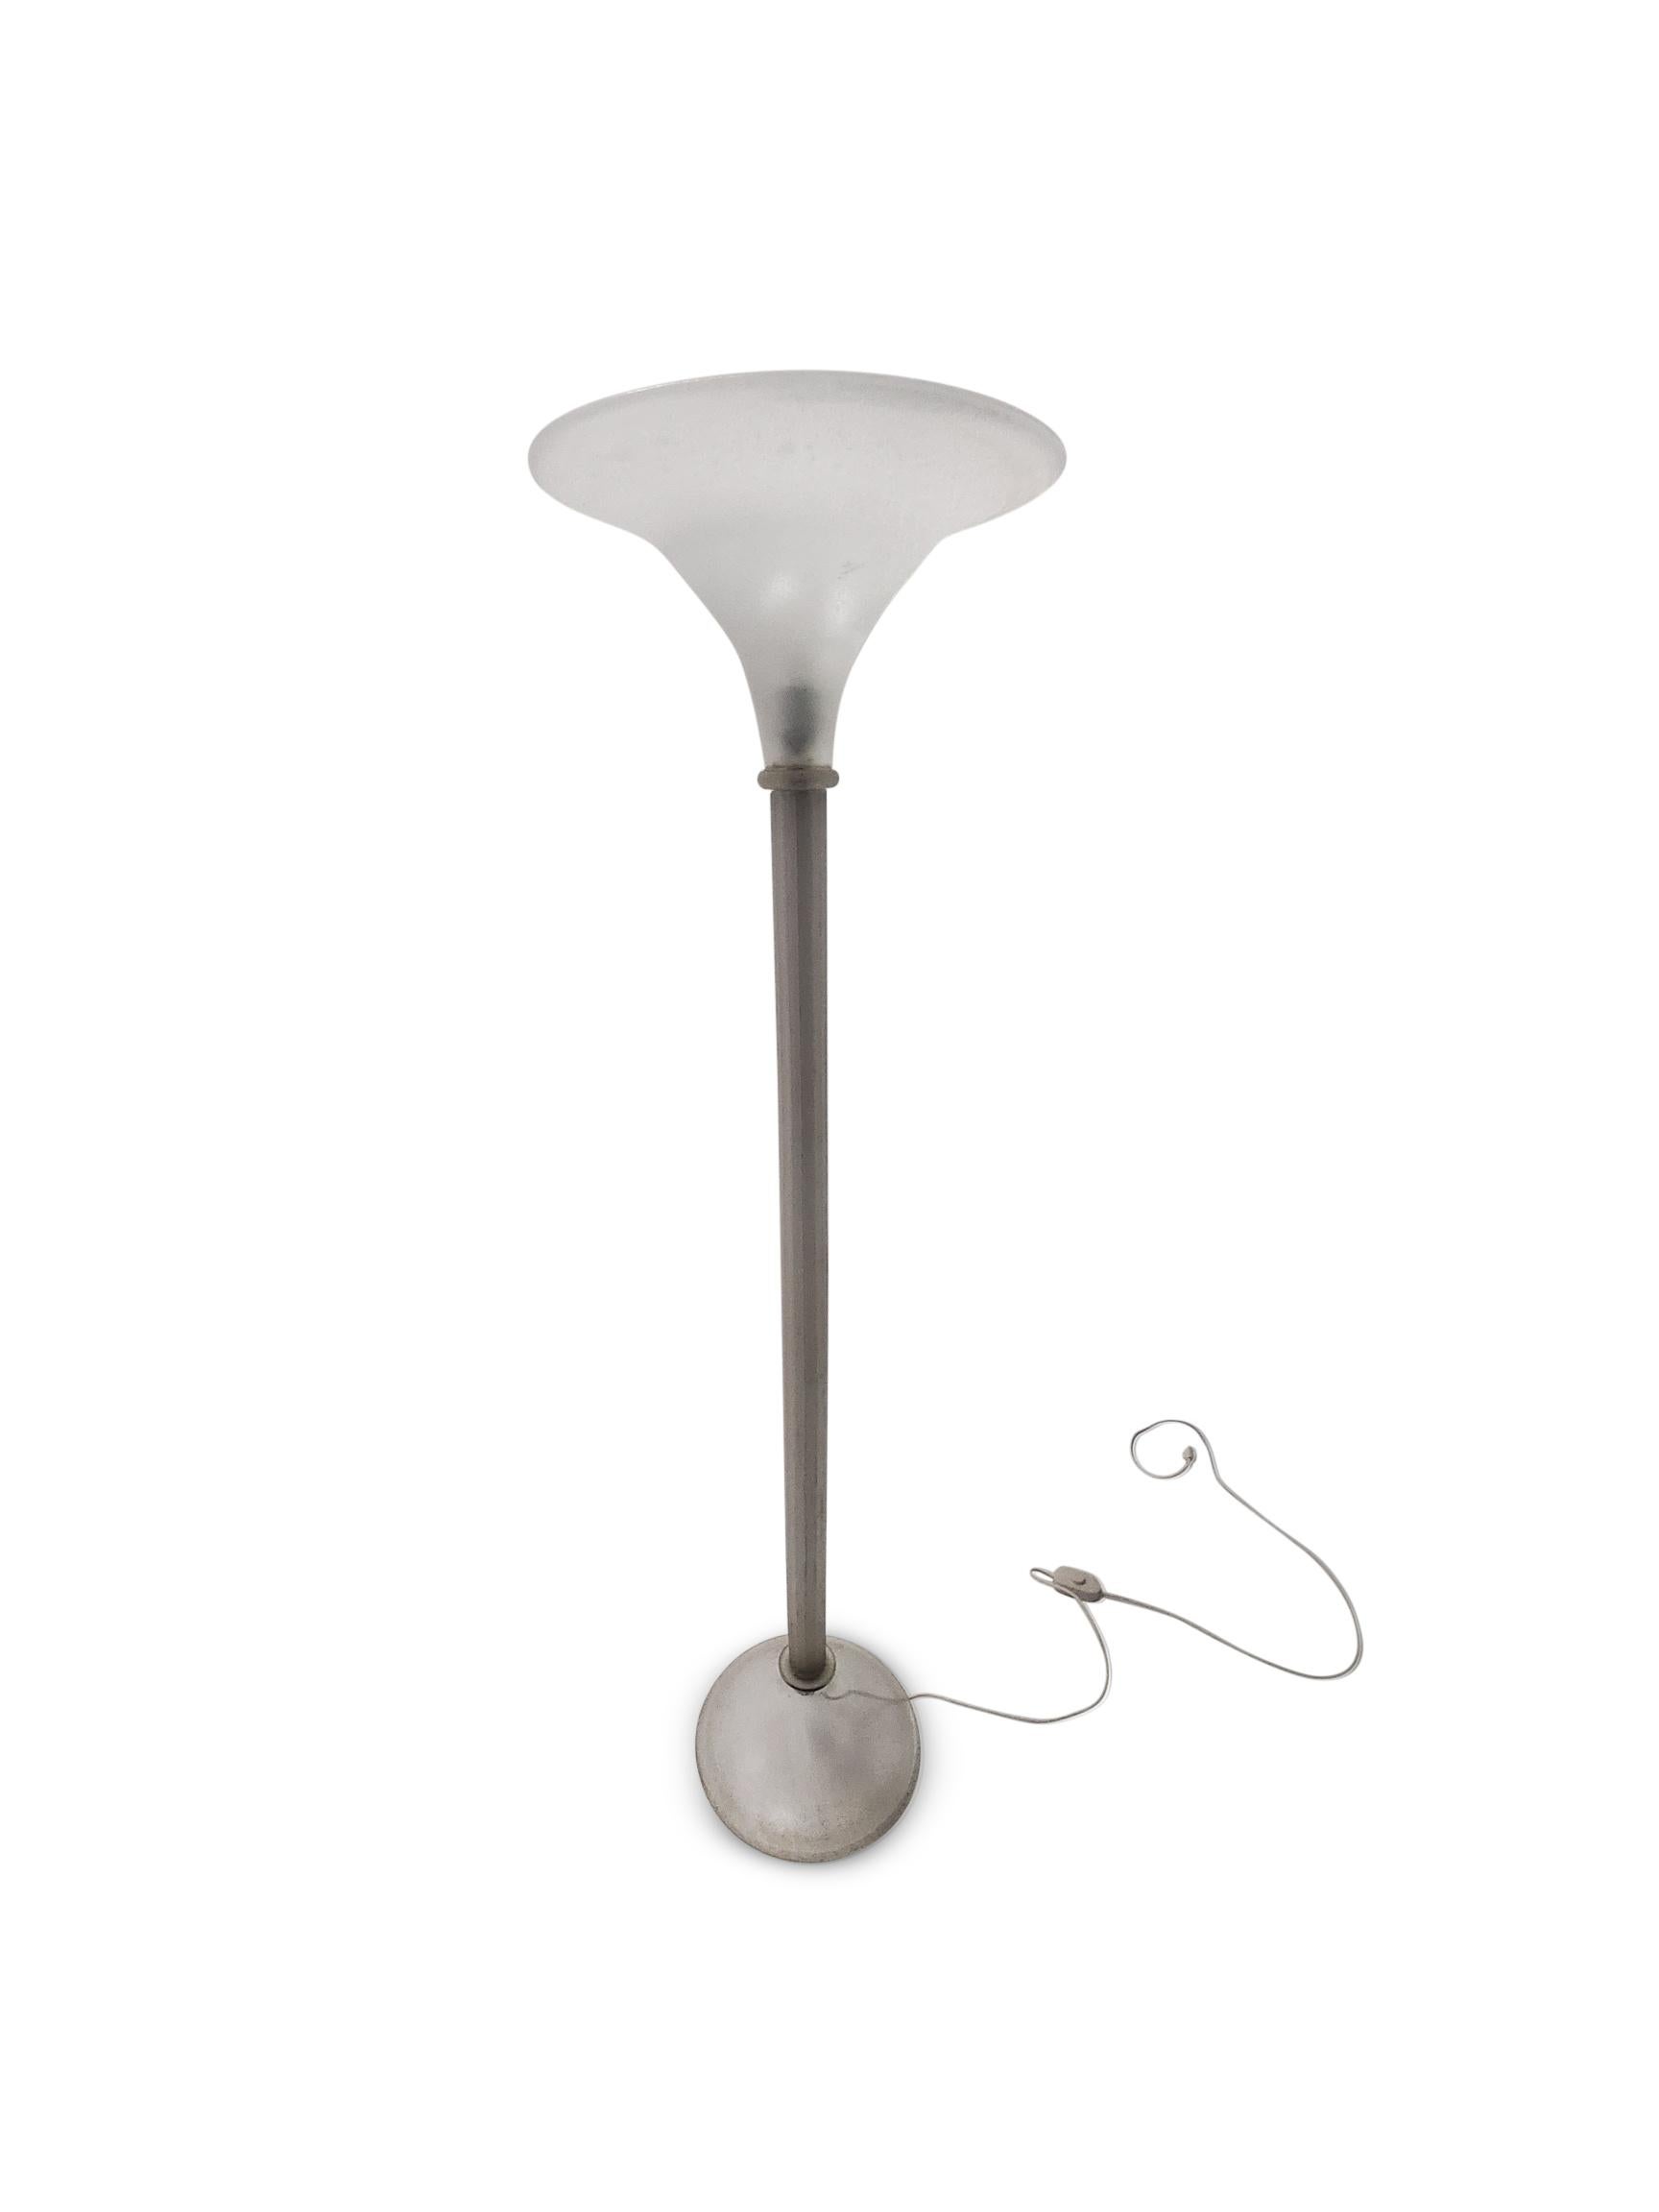 Karl Springer for Seguso Murano Glass Torchère Floor Lamp  In Good Condition For Sale In Middlesex, NJ